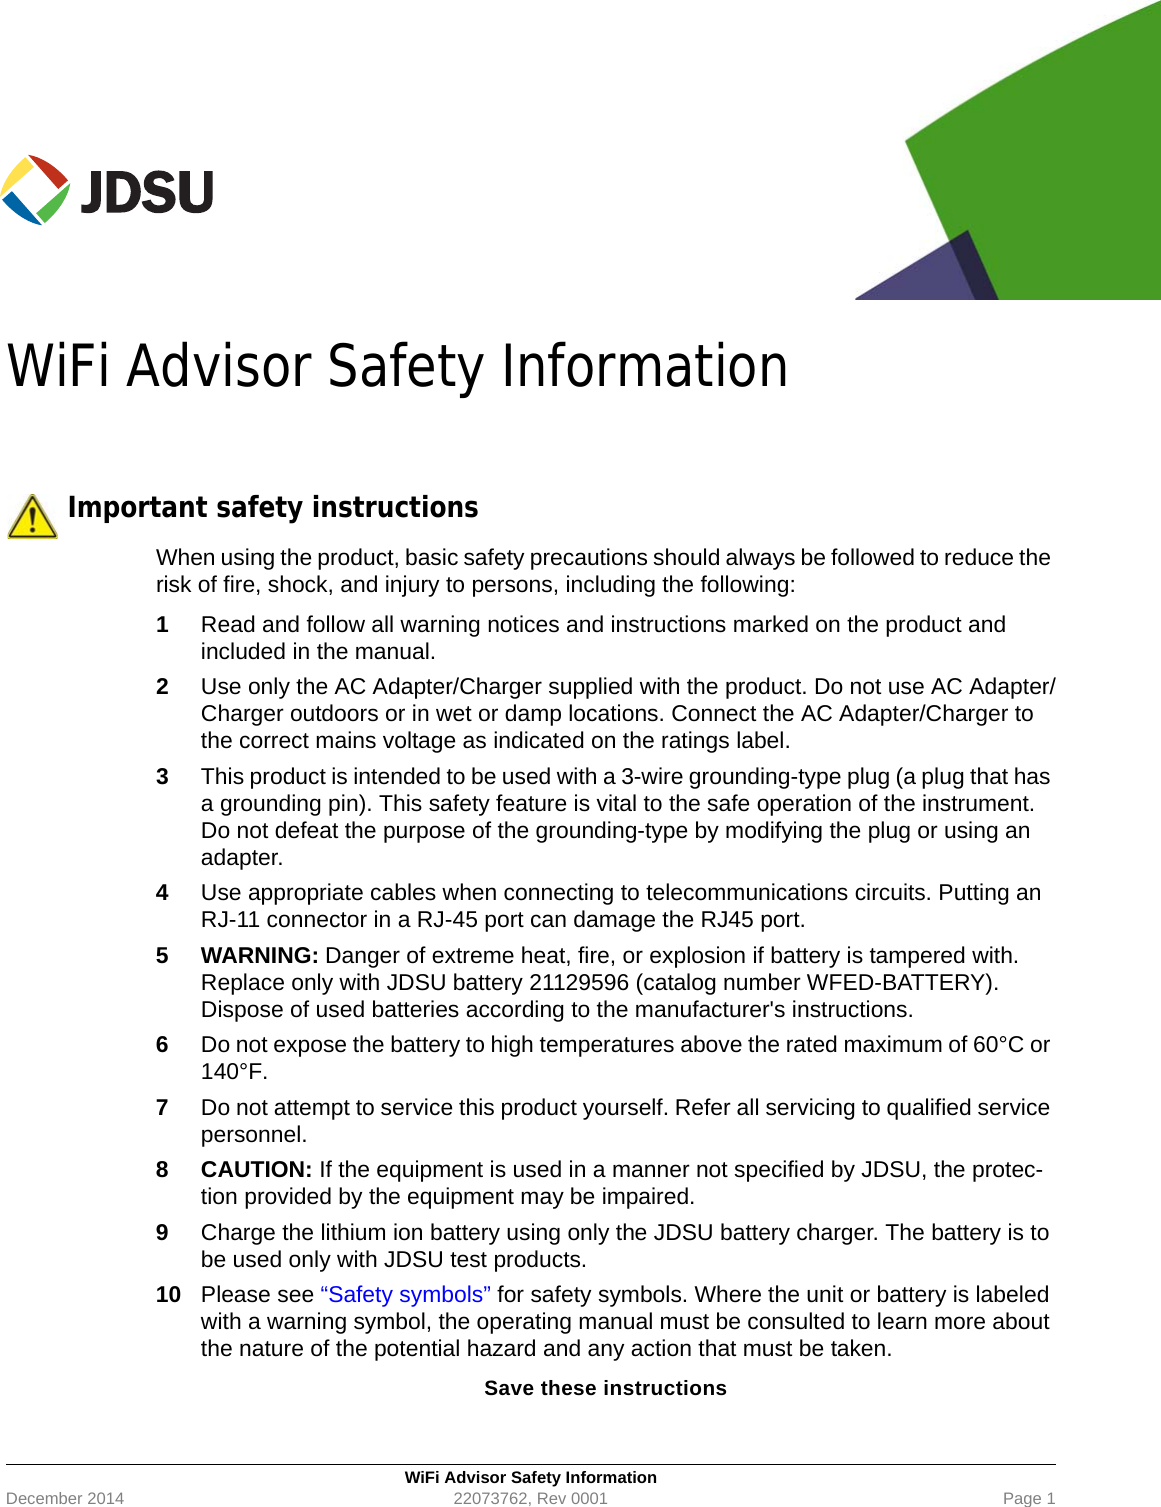 WiFi Advisor Safety InformationDecember 2014 22073762, Rev 0001 Page 1WiFi Advisor Safety Information Important safety instructionsWhen using the product, basic safety precautions should always be followed to reduce the risk of fire, shock, and injury to persons, including the following:1Read and follow all warning notices and instructions marked on the product and included in the manual.2Use only the AC Adapter/Charger supplied with the product. Do not use AC Adapter/Charger outdoors or in wet or damp locations. Connect the AC Adapter/Charger to the correct mains voltage as indicated on the ratings label.3This product is intended to be used with a 3-wire grounding-type plug (a plug that has a grounding pin). This safety feature is vital to the safe operation of the instrument. Do not defeat the purpose of the grounding-type by modifying the plug or using an adapter.4Use appropriate cables when connecting to telecommunications circuits. Putting an RJ-11 connector in a RJ-45 port can damage the RJ45 port.5 WARNING: Danger of extreme heat, fire, or explosion if battery is tampered with. Replace only with JDSU battery 21129596 (catalog number WFED-BATTERY). Dispose of used batteries according to the manufacturer&apos;s instructions.6Do not expose the battery to high temperatures above the rated maximum of 60°C or 140°F. 7Do not attempt to service this product yourself. Refer all servicing to qualified service personnel.8 CAUTION: If the equipment is used in a manner not specified by JDSU, the protec-tion provided by the equipment may be impaired.9Charge the lithium ion battery using only the JDSU battery charger. The battery is to be used only with JDSU test products.10 Please see “Safety symbols” for safety symbols. Where the unit or battery is labeled with a warning symbol, the operating manual must be consulted to learn more about the nature of the potential hazard and any action that must be taken.Save these instructions